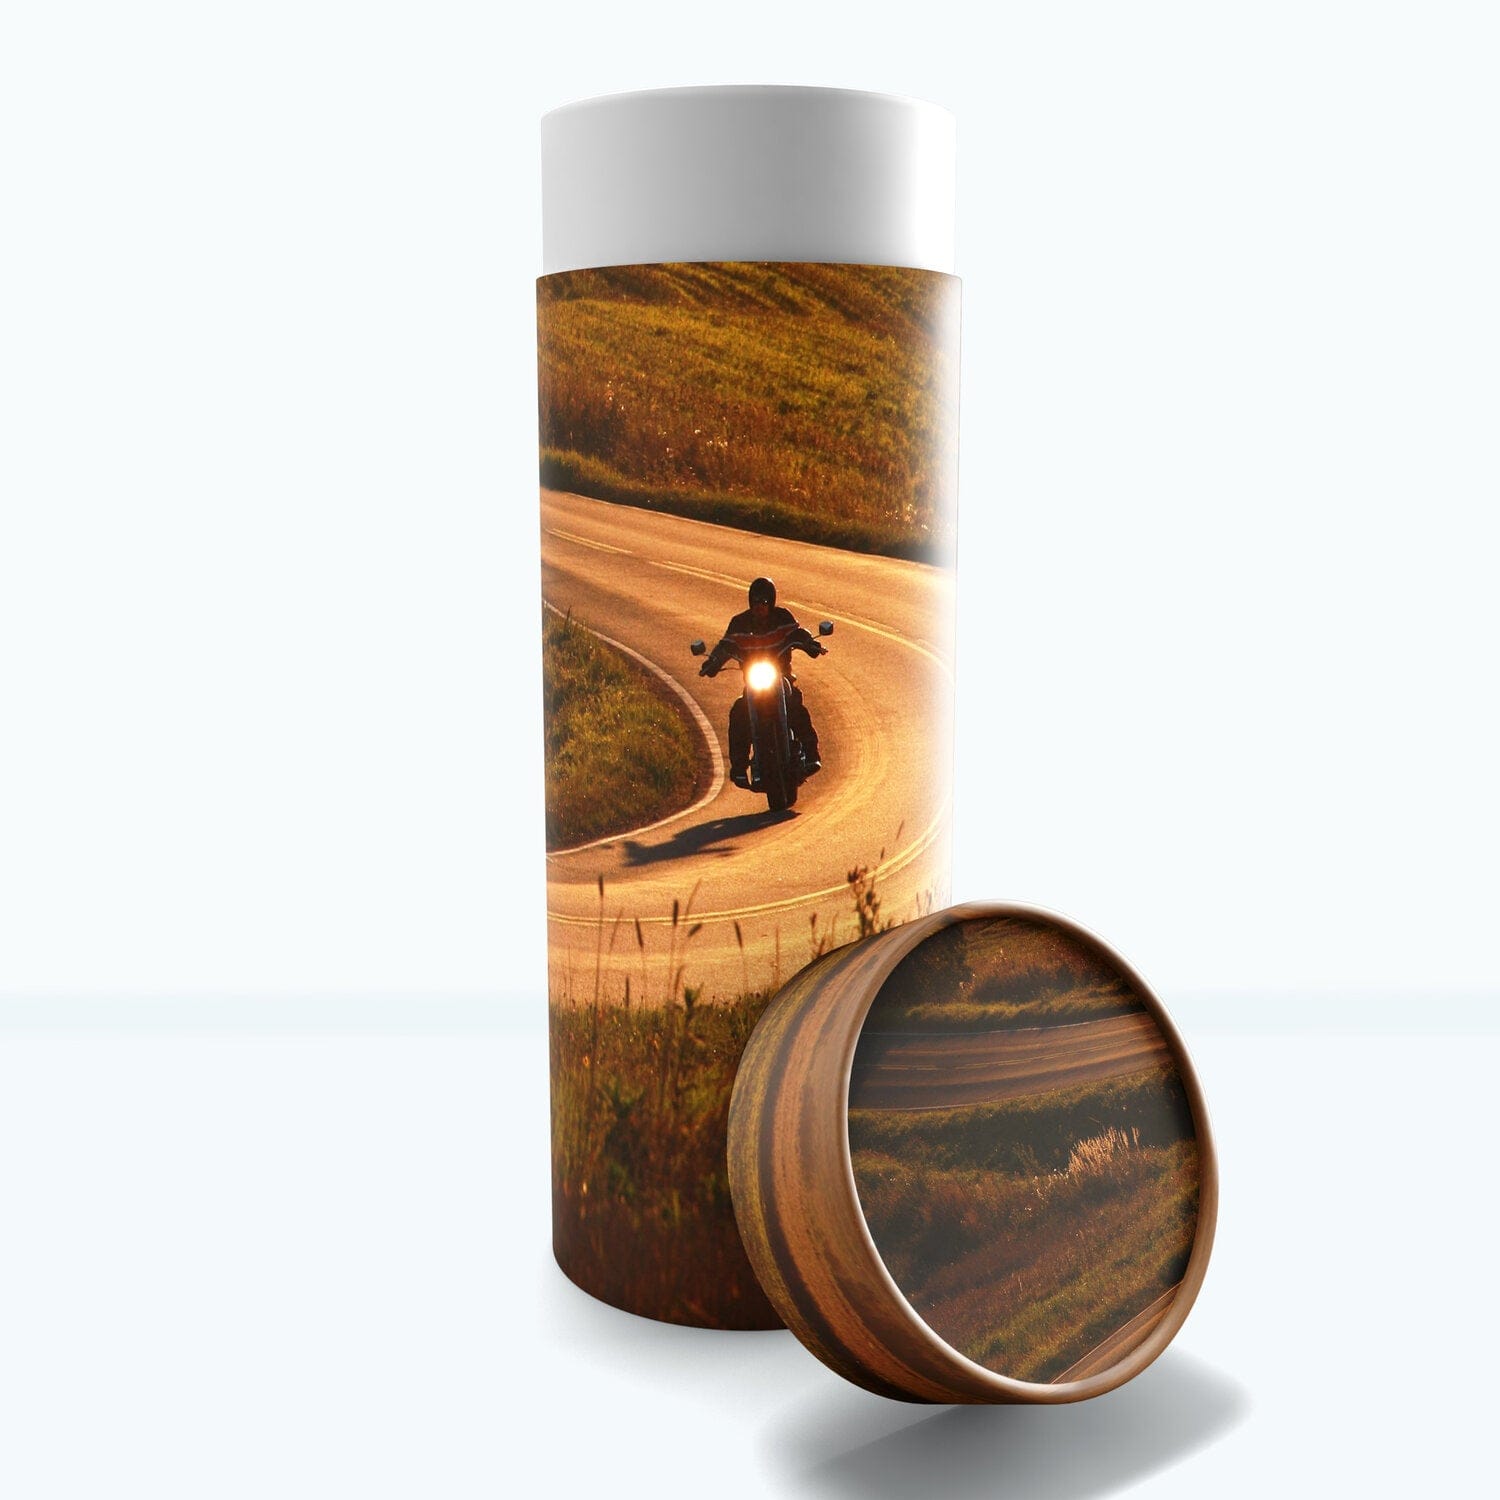 Commemorative Cremation Urns Motorcycle Biodegradable & Eco Friendly Burial or Scattering Urn / Tube